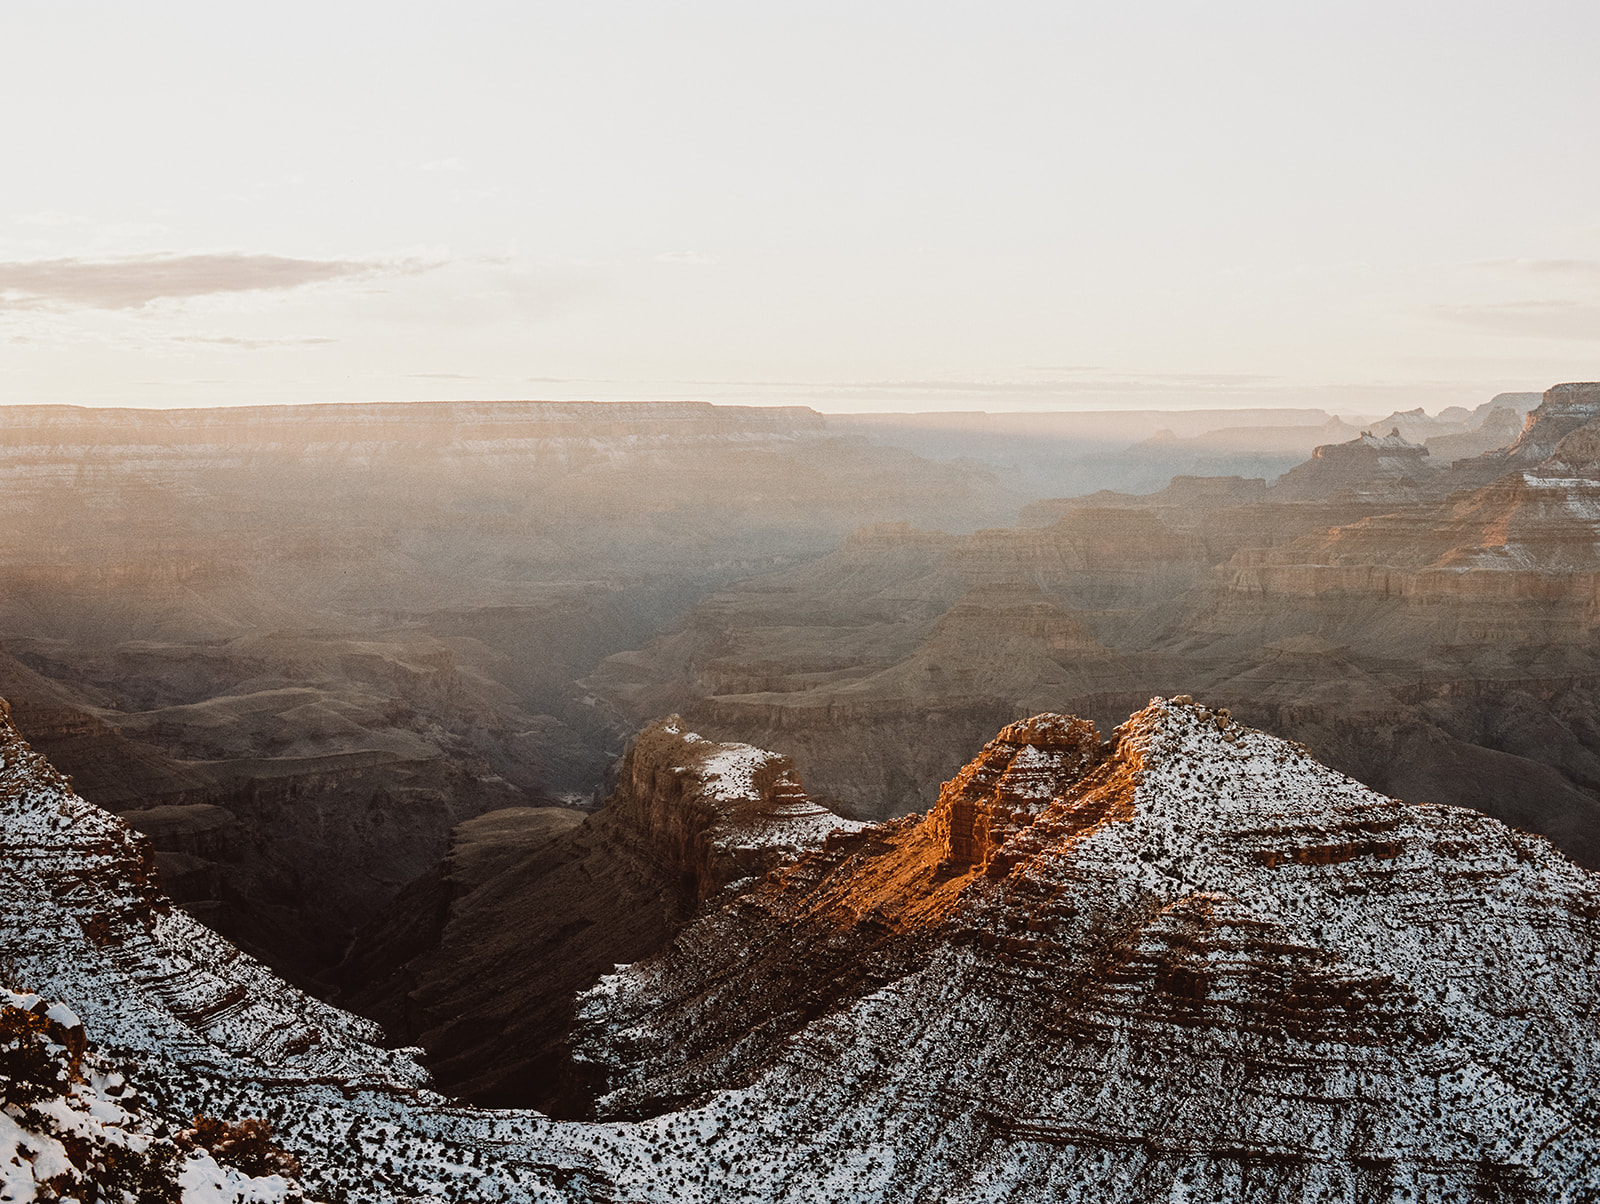 A scenic view of the Grand Canyon covered in snow